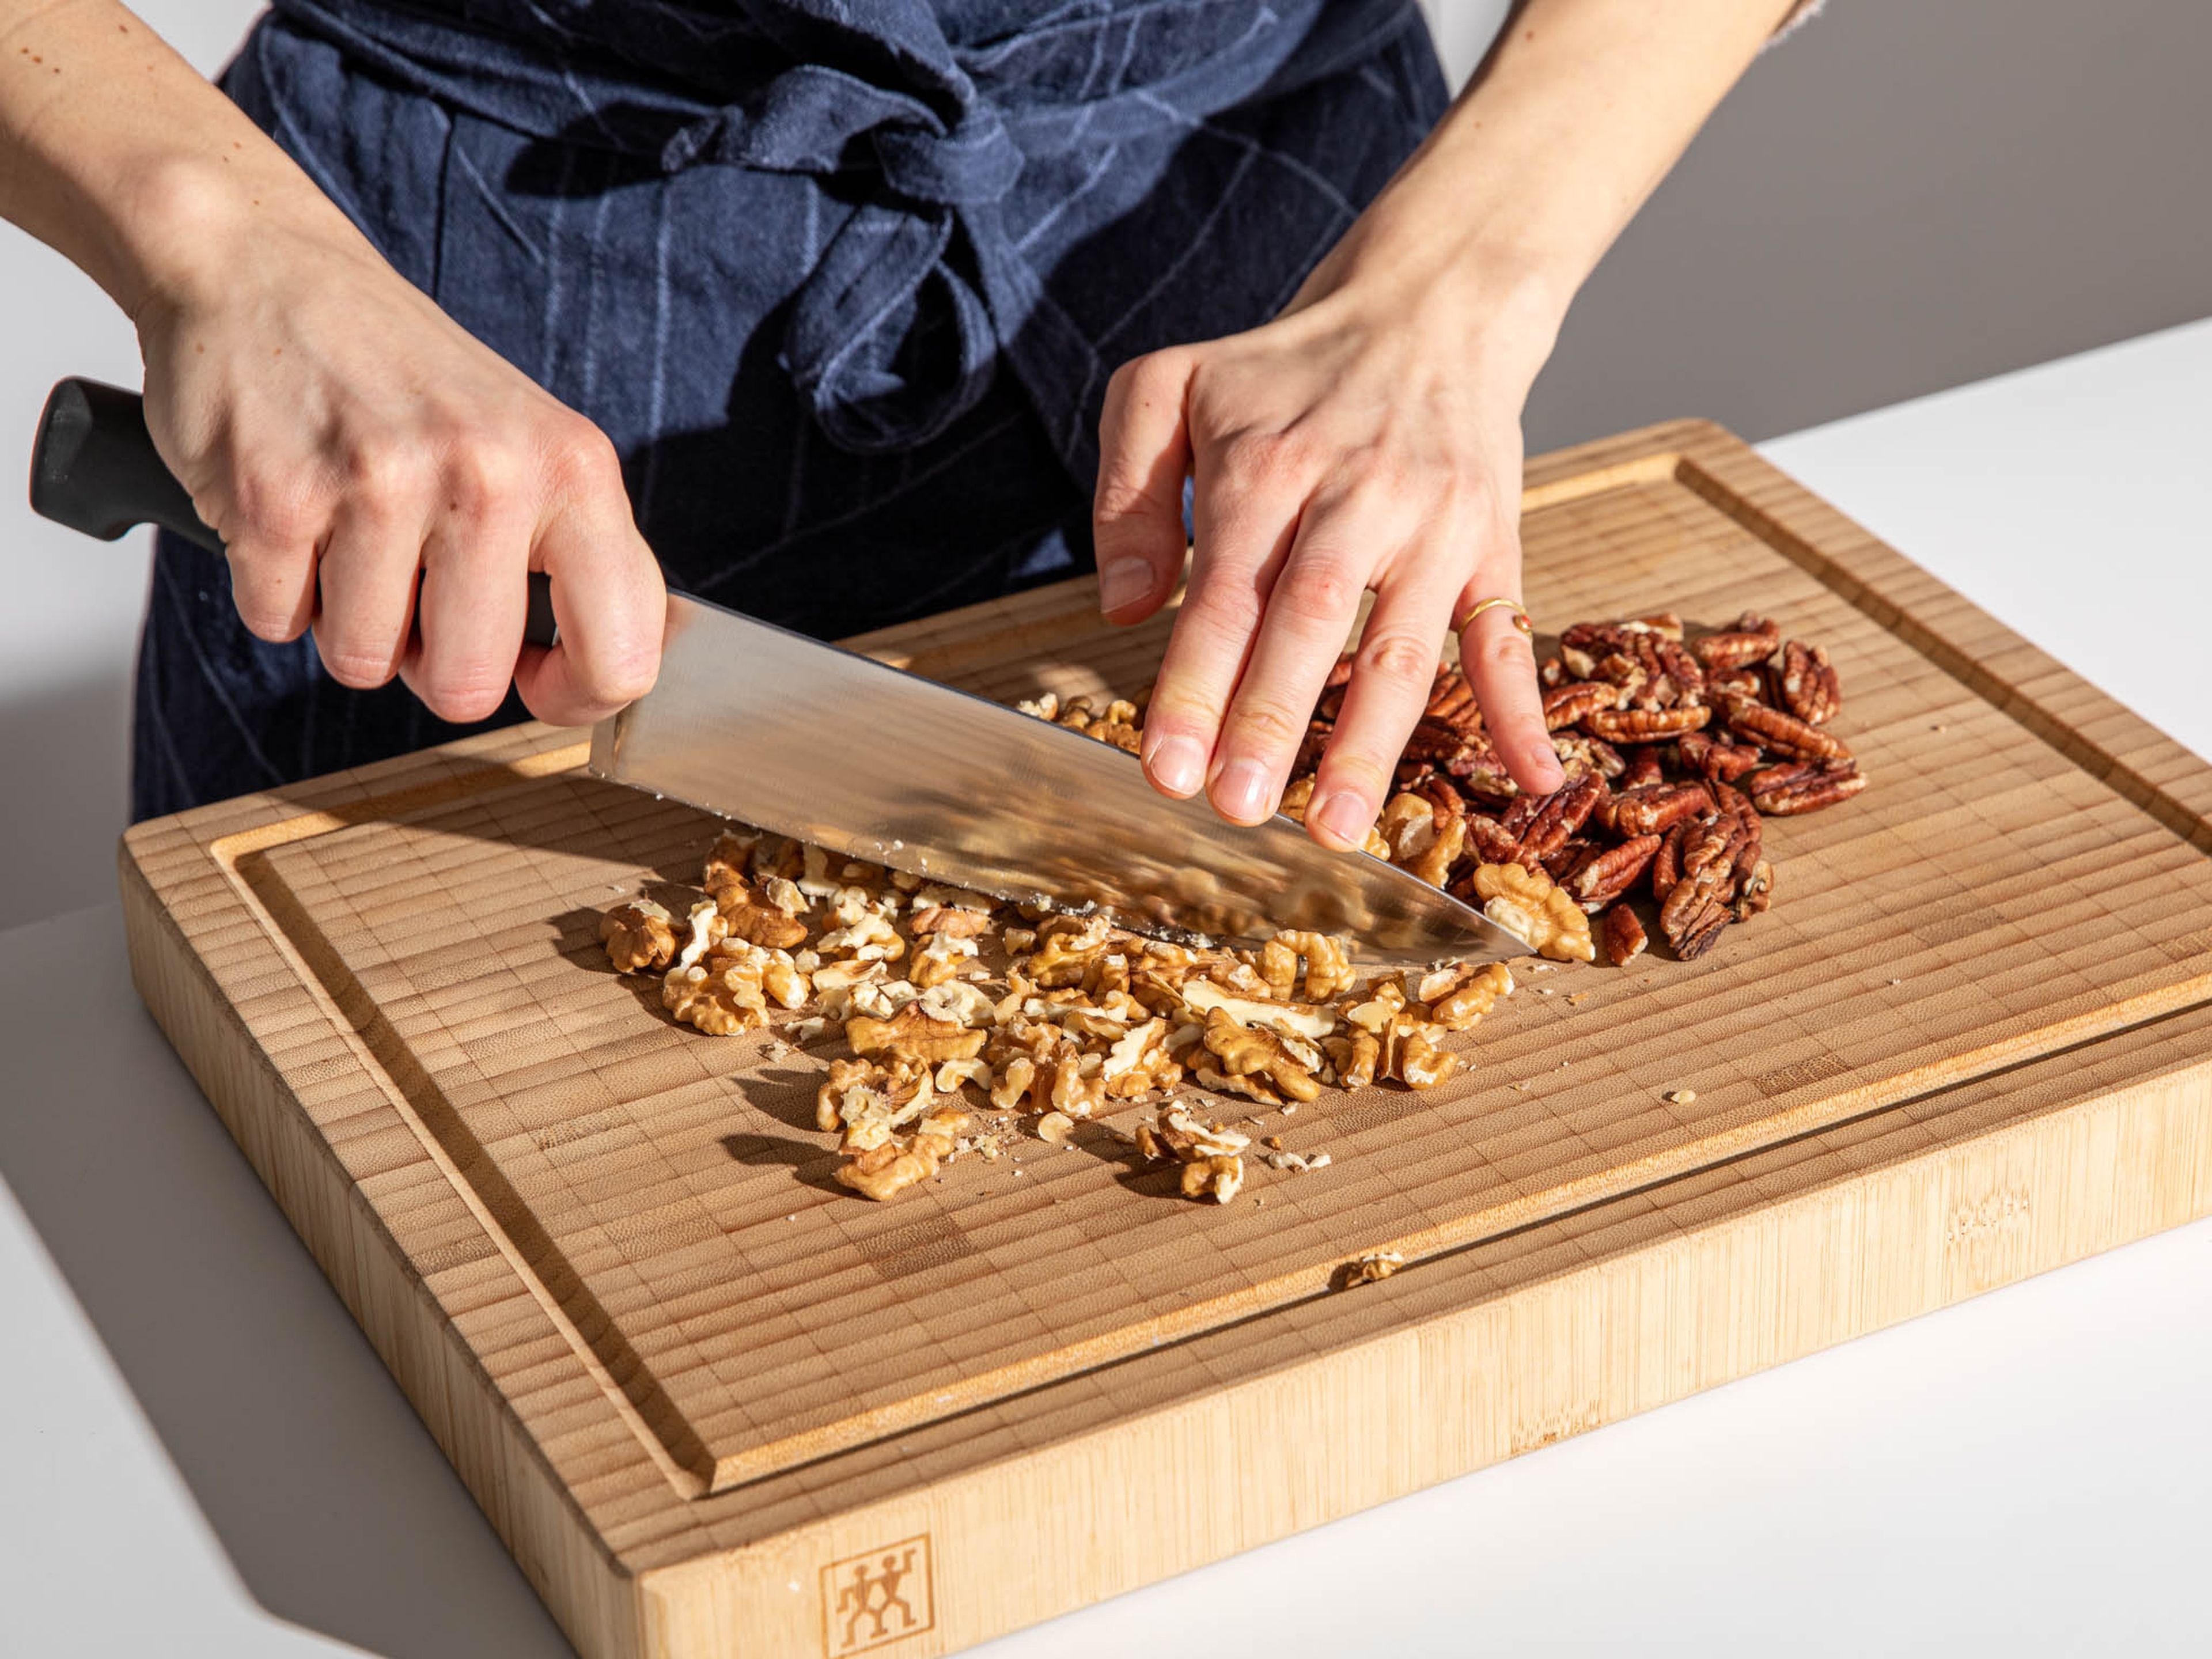 Preheat the oven to 180°C/350°F. Line a baking tray with baking paper and set aside. Roughly chop pecans and walnuts. In a large bowl, add and mix oats, chopped nuts, sesame seeds, ground cinnamon, and salt.